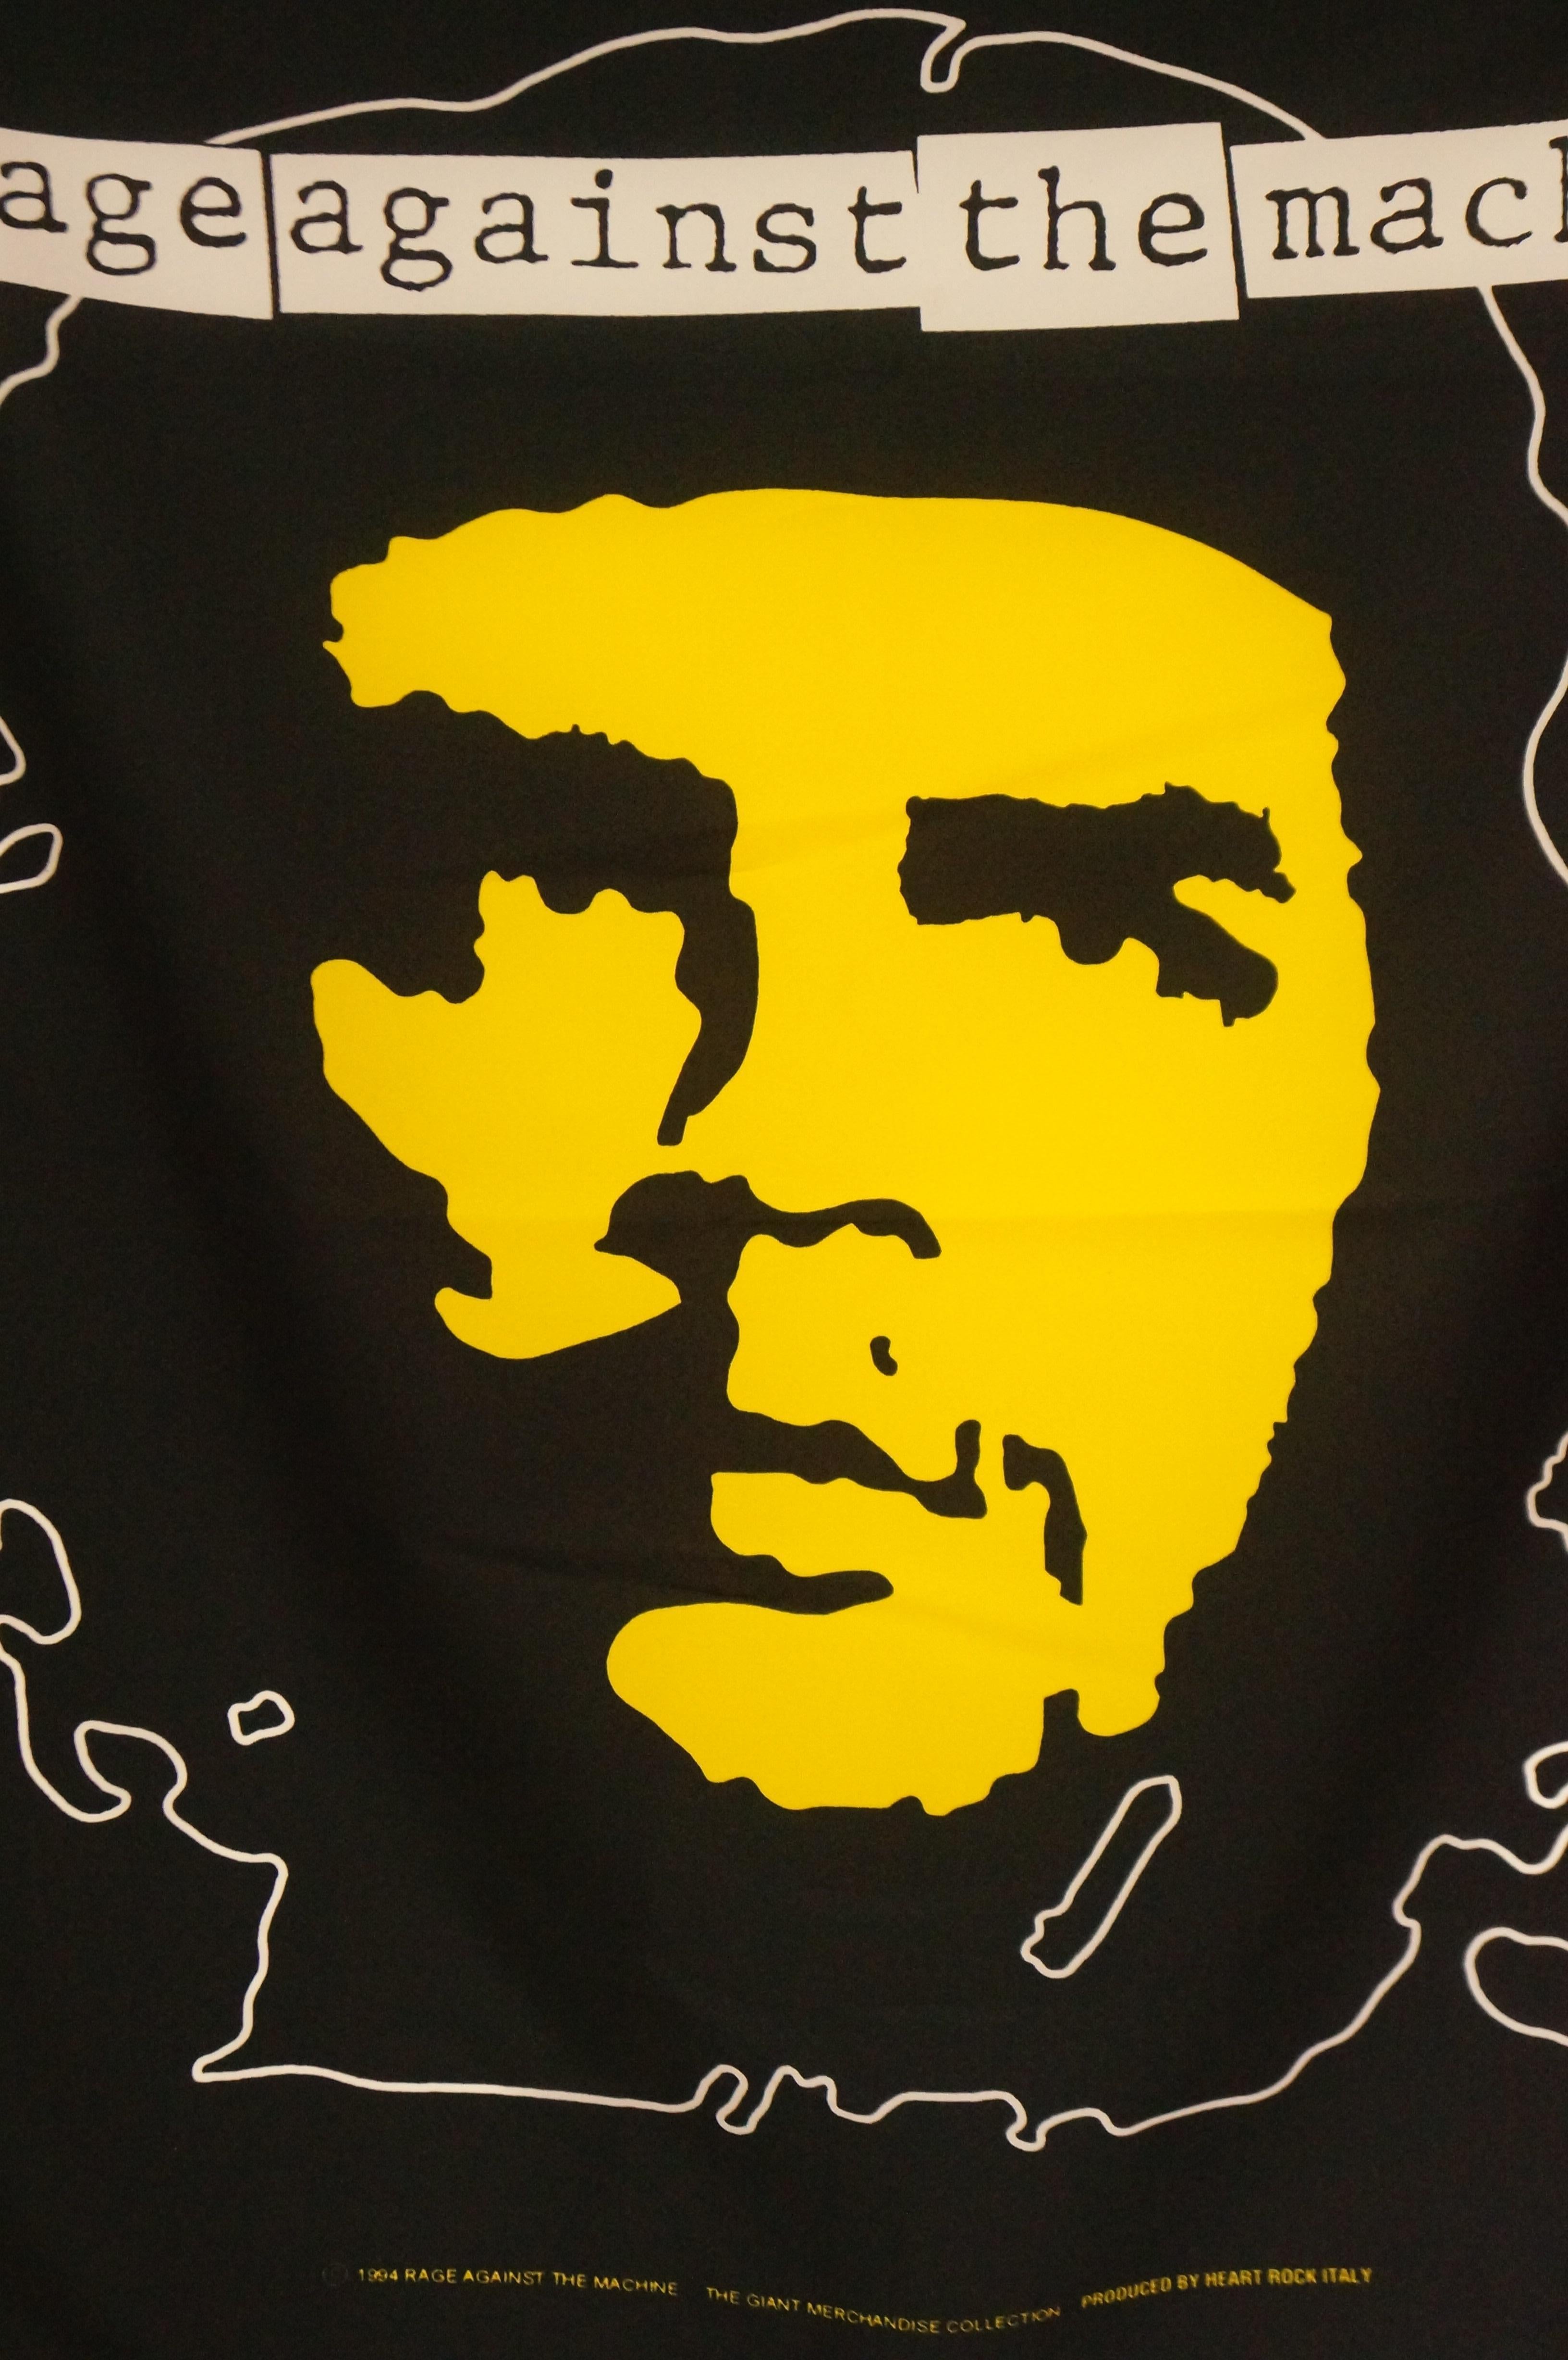 Rare 1994 Rage against the Machine wall flag scarf featuring a large graphic of Che Guevara. The scarf is primarily black with white and yellow screenprint graphics. The piece depicts Che Guevara in Alberto Korda's iconic 